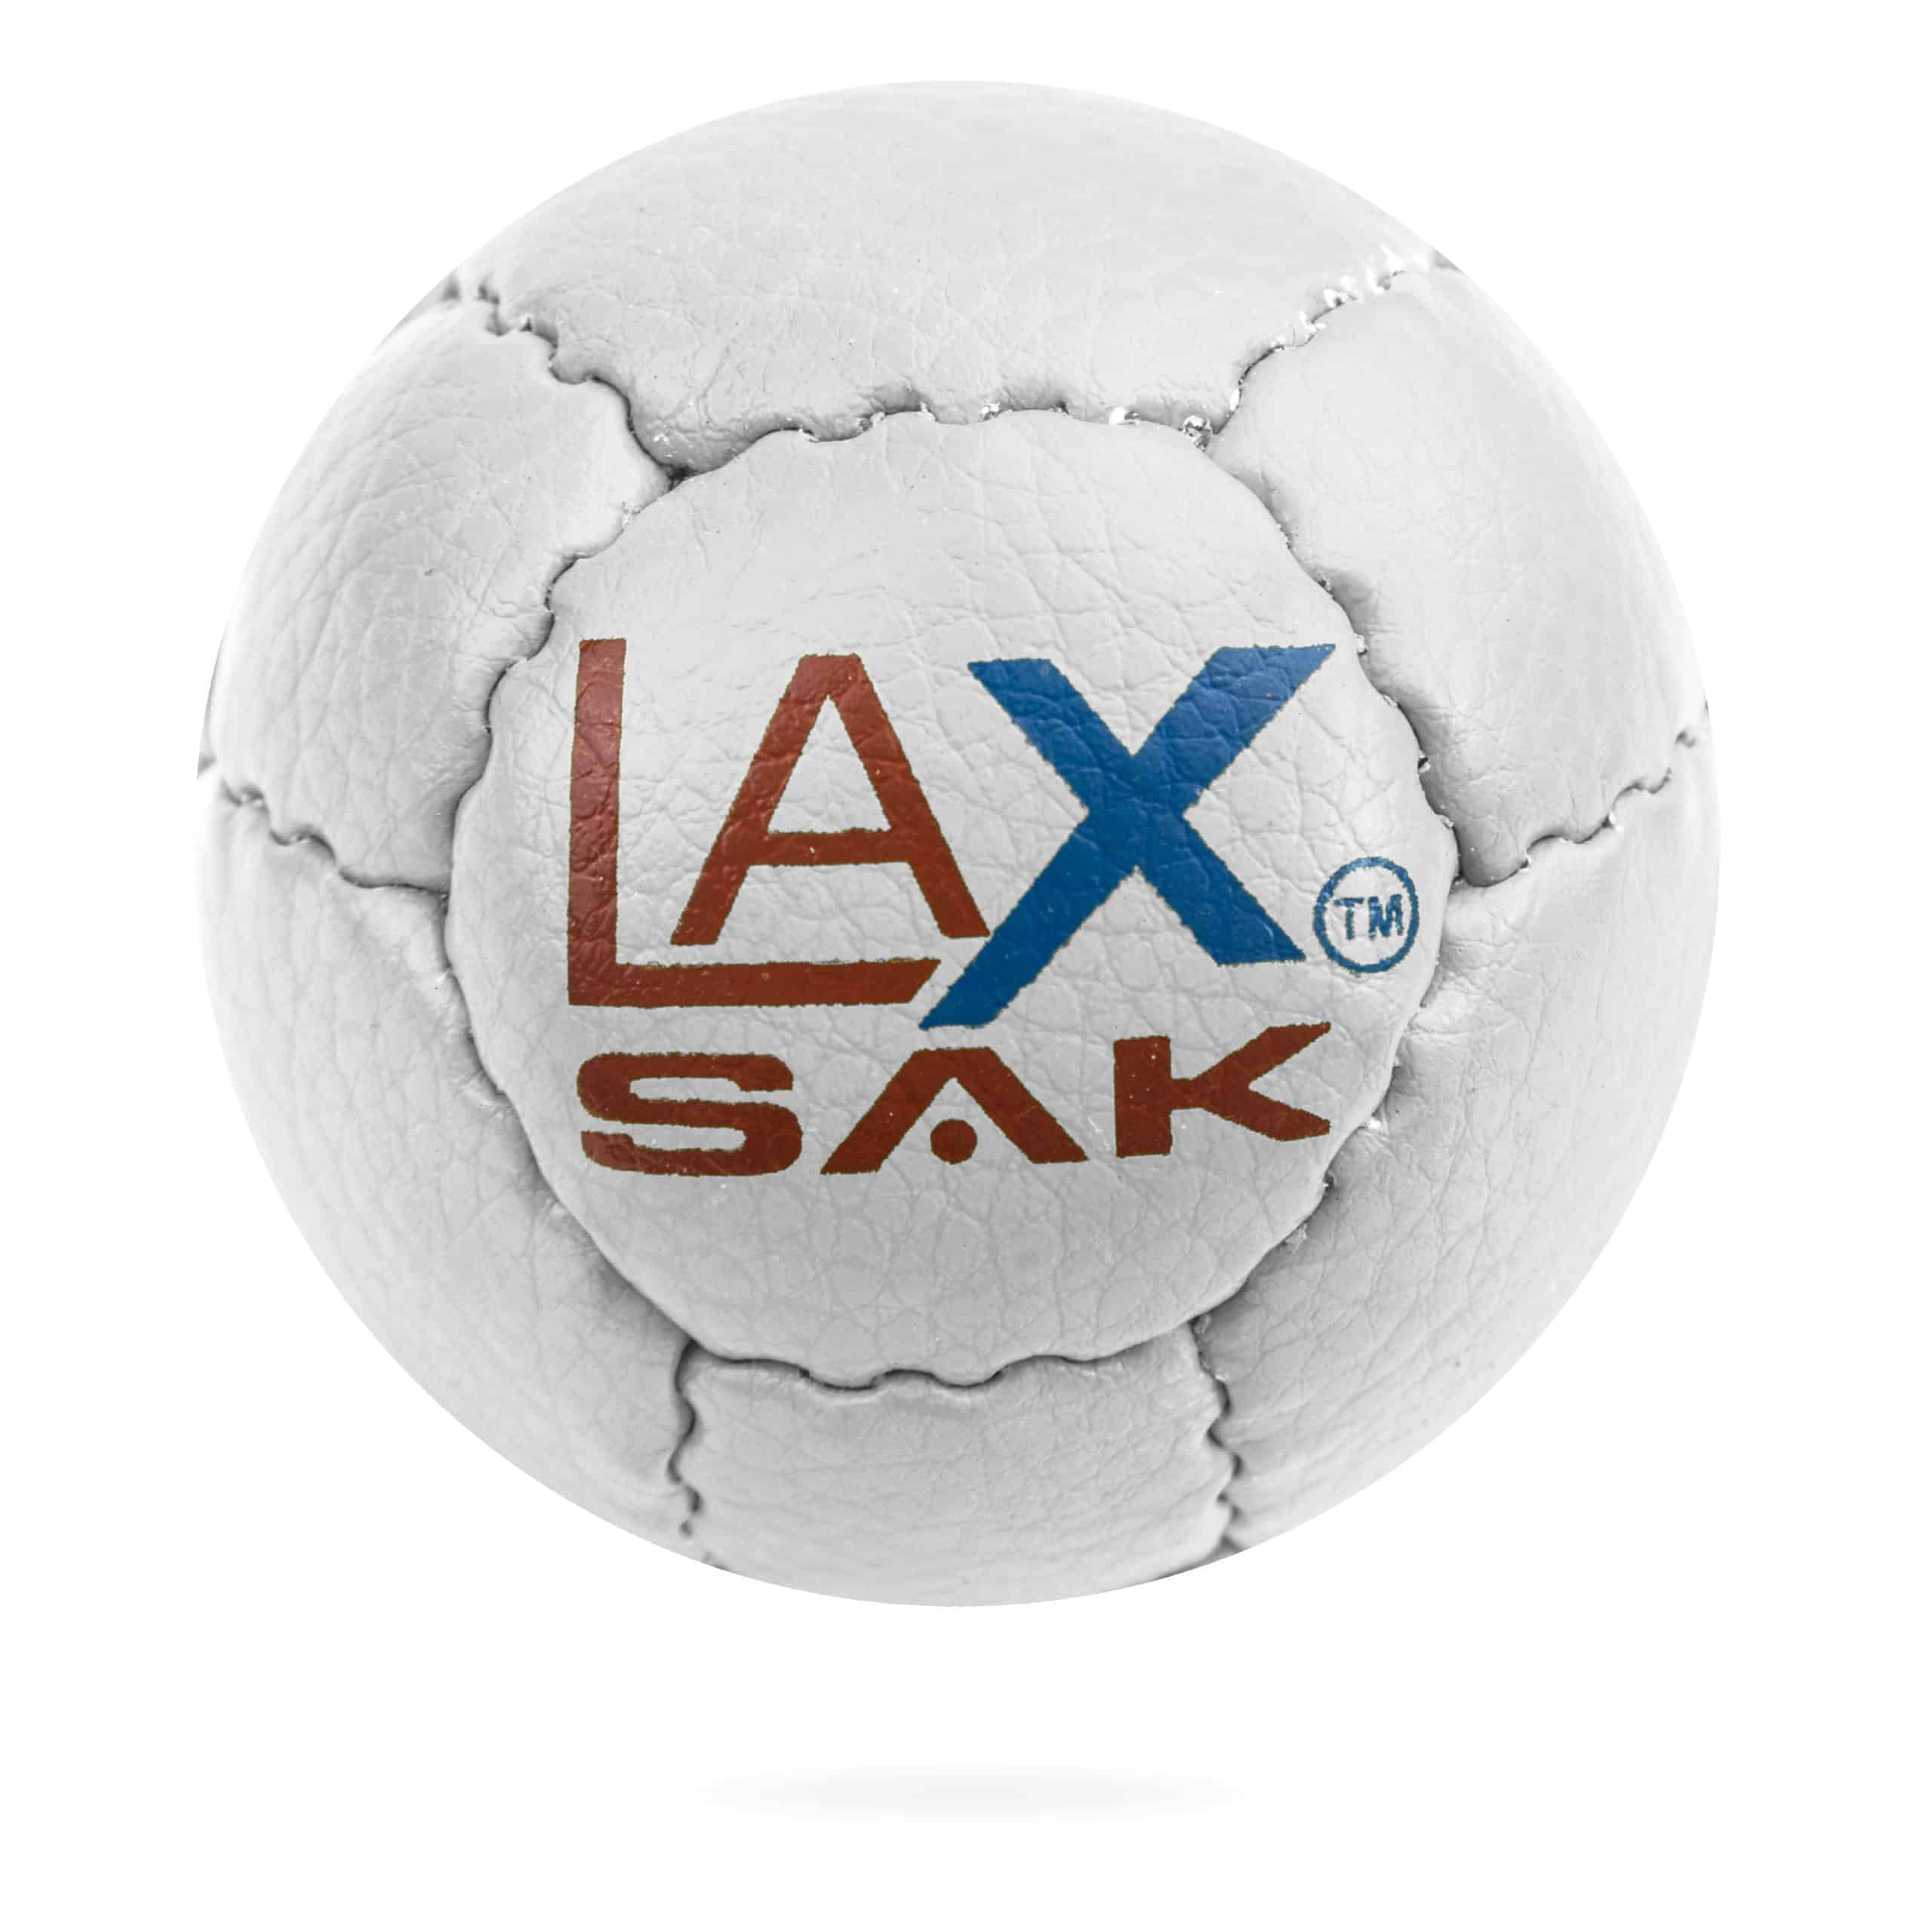 Stars & Confetti SWAX LAX Lacrosse Training Ball Bundle Indoor & Outdoor Practice Ball with Less Bounce & Rebounds Same Size & Weight as Regulation Lacrosse Ball but Soft 